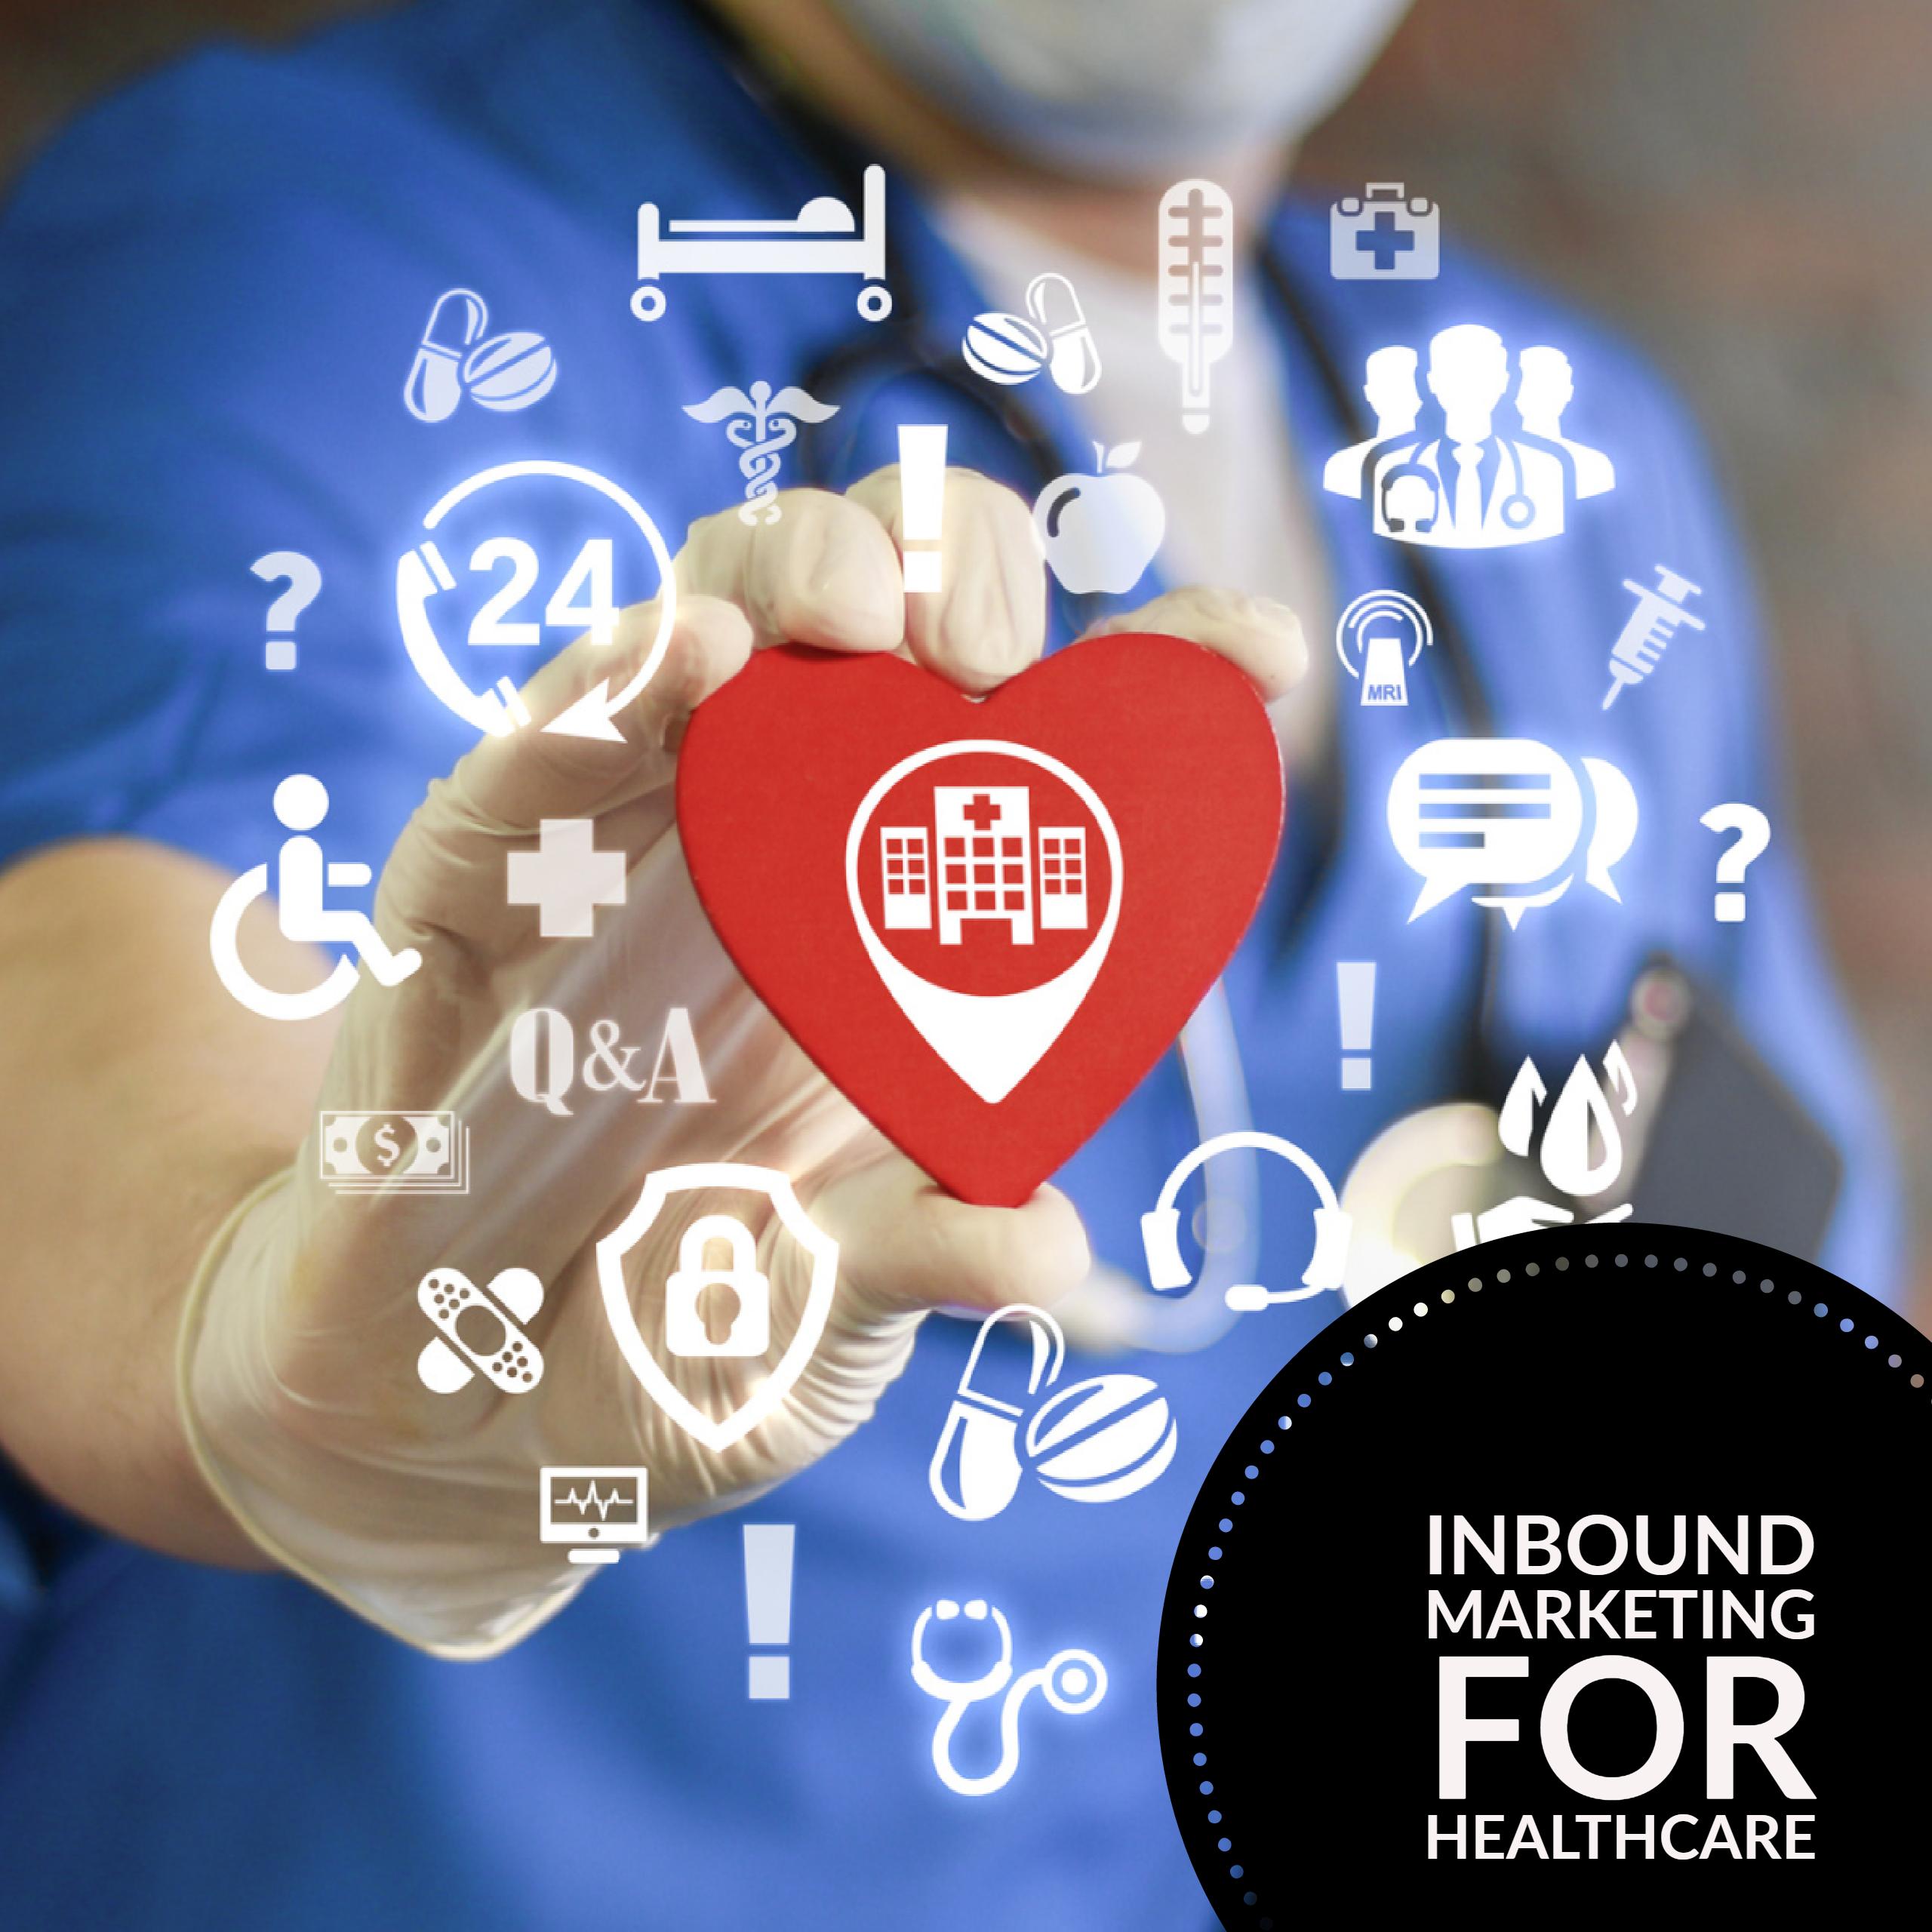 Healthcare Marketing: Why Inbound is a Perfect Fit for Healthcare